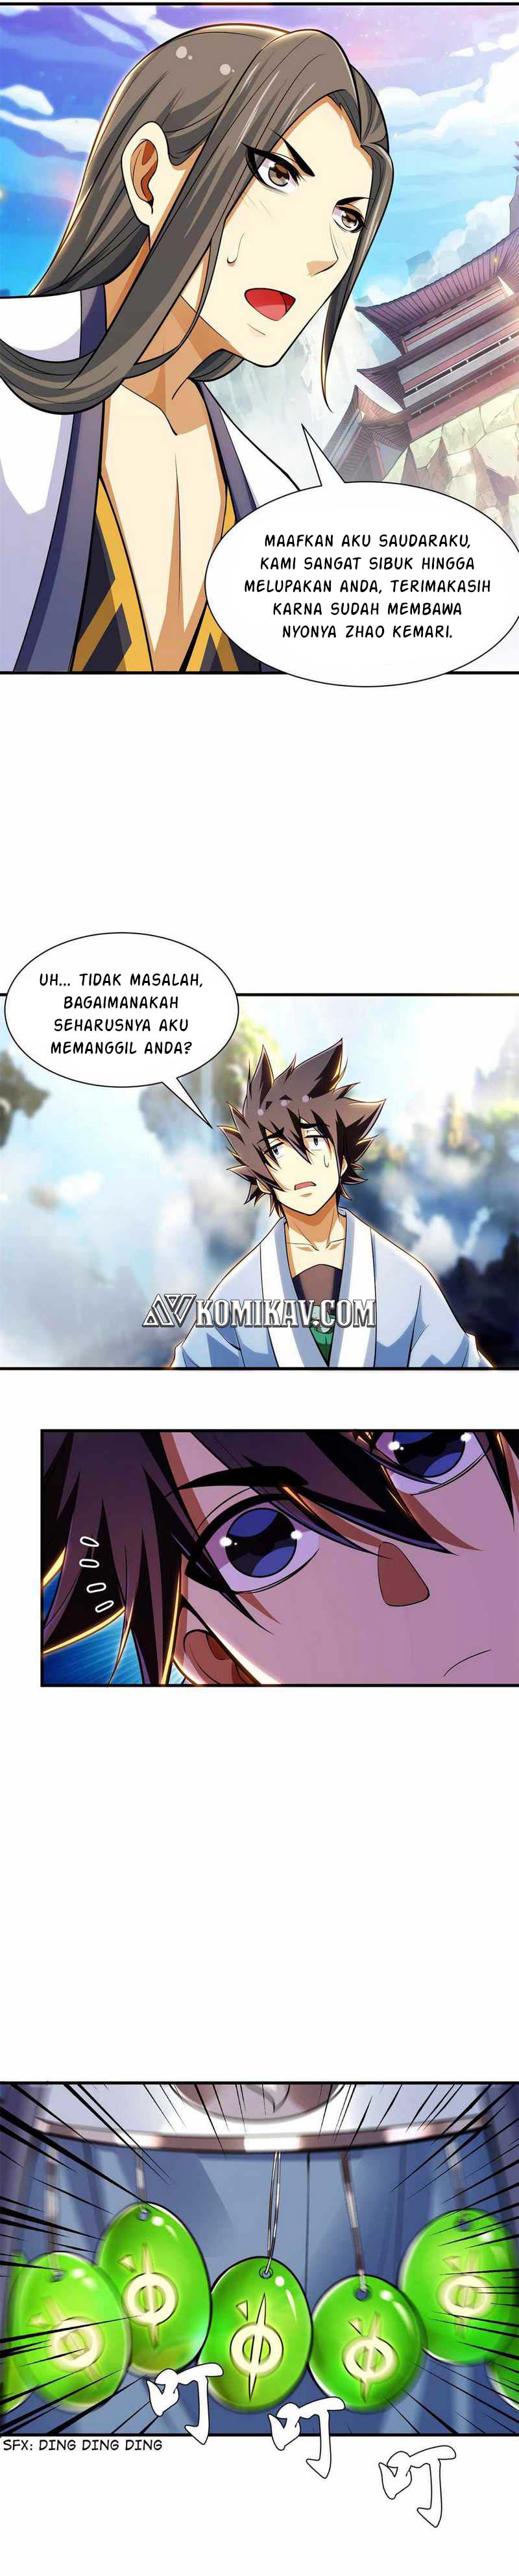 Dilarang COPAS - situs resmi www.mangacanblog.com - Komik i just want to be beaten to death by everyone 026 - chapter 26 27 Indonesia i just want to be beaten to death by everyone 026 - chapter 26 Terbaru 16|Baca Manga Komik Indonesia|Mangacan